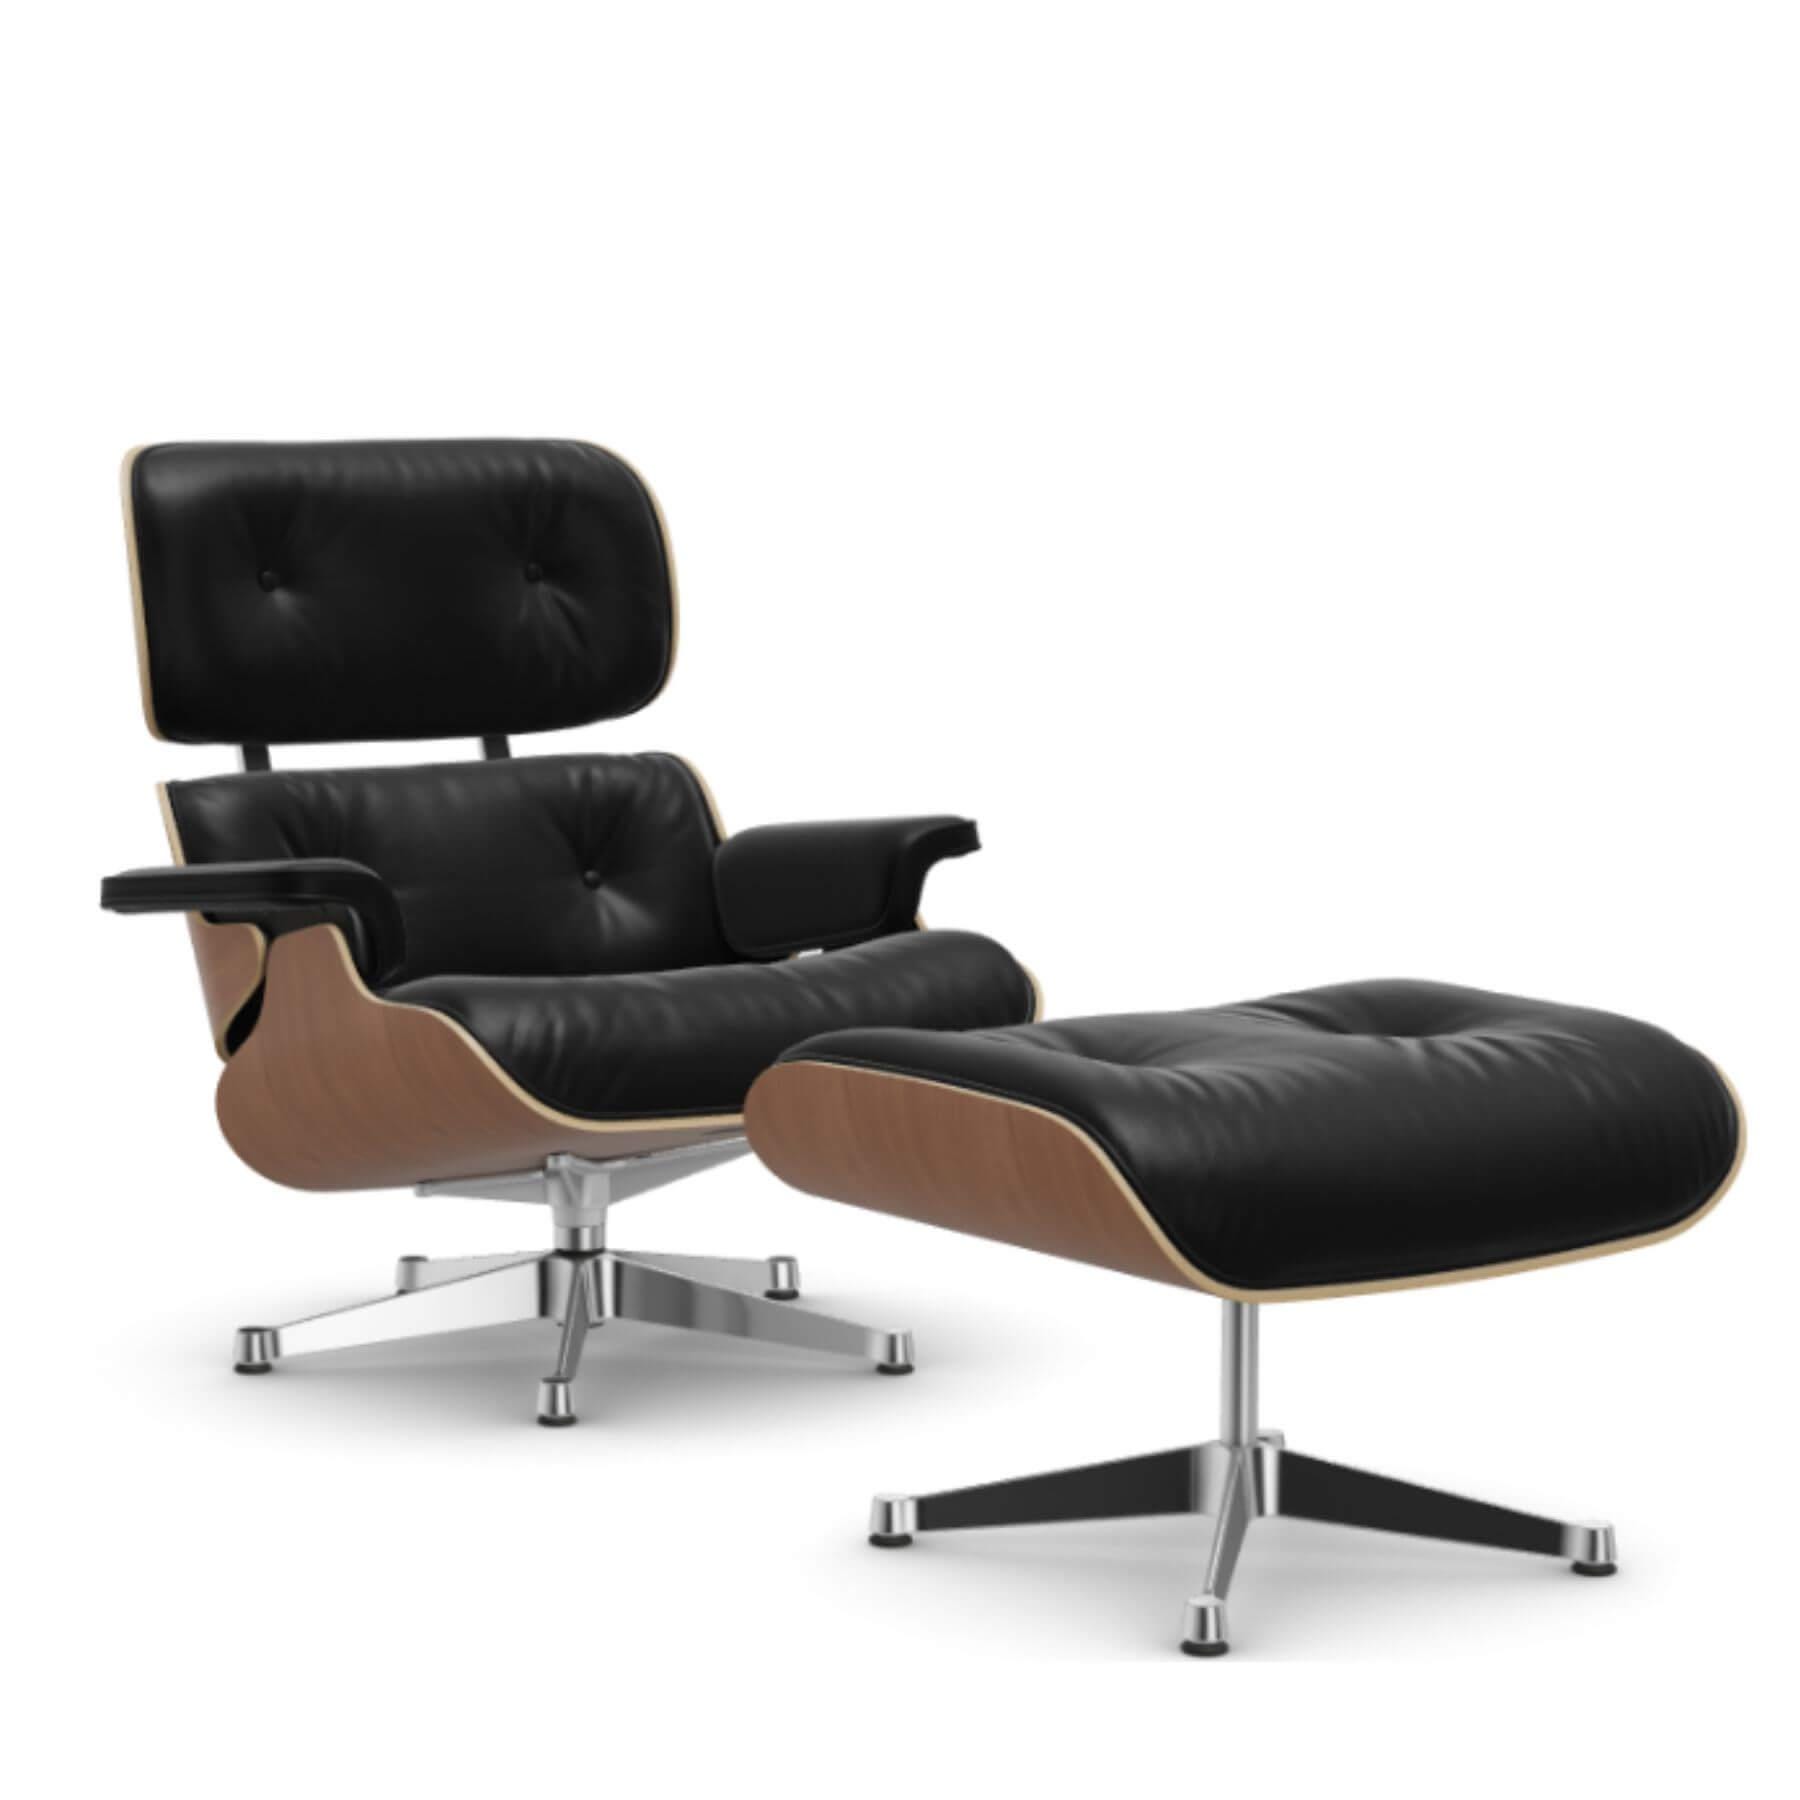 Vitra Eames Lounge Chair American Cherry Leather Natural F Nero Polished Aluminium With Ottoman Light Wood Designer Furniture From Holloways Of Lu